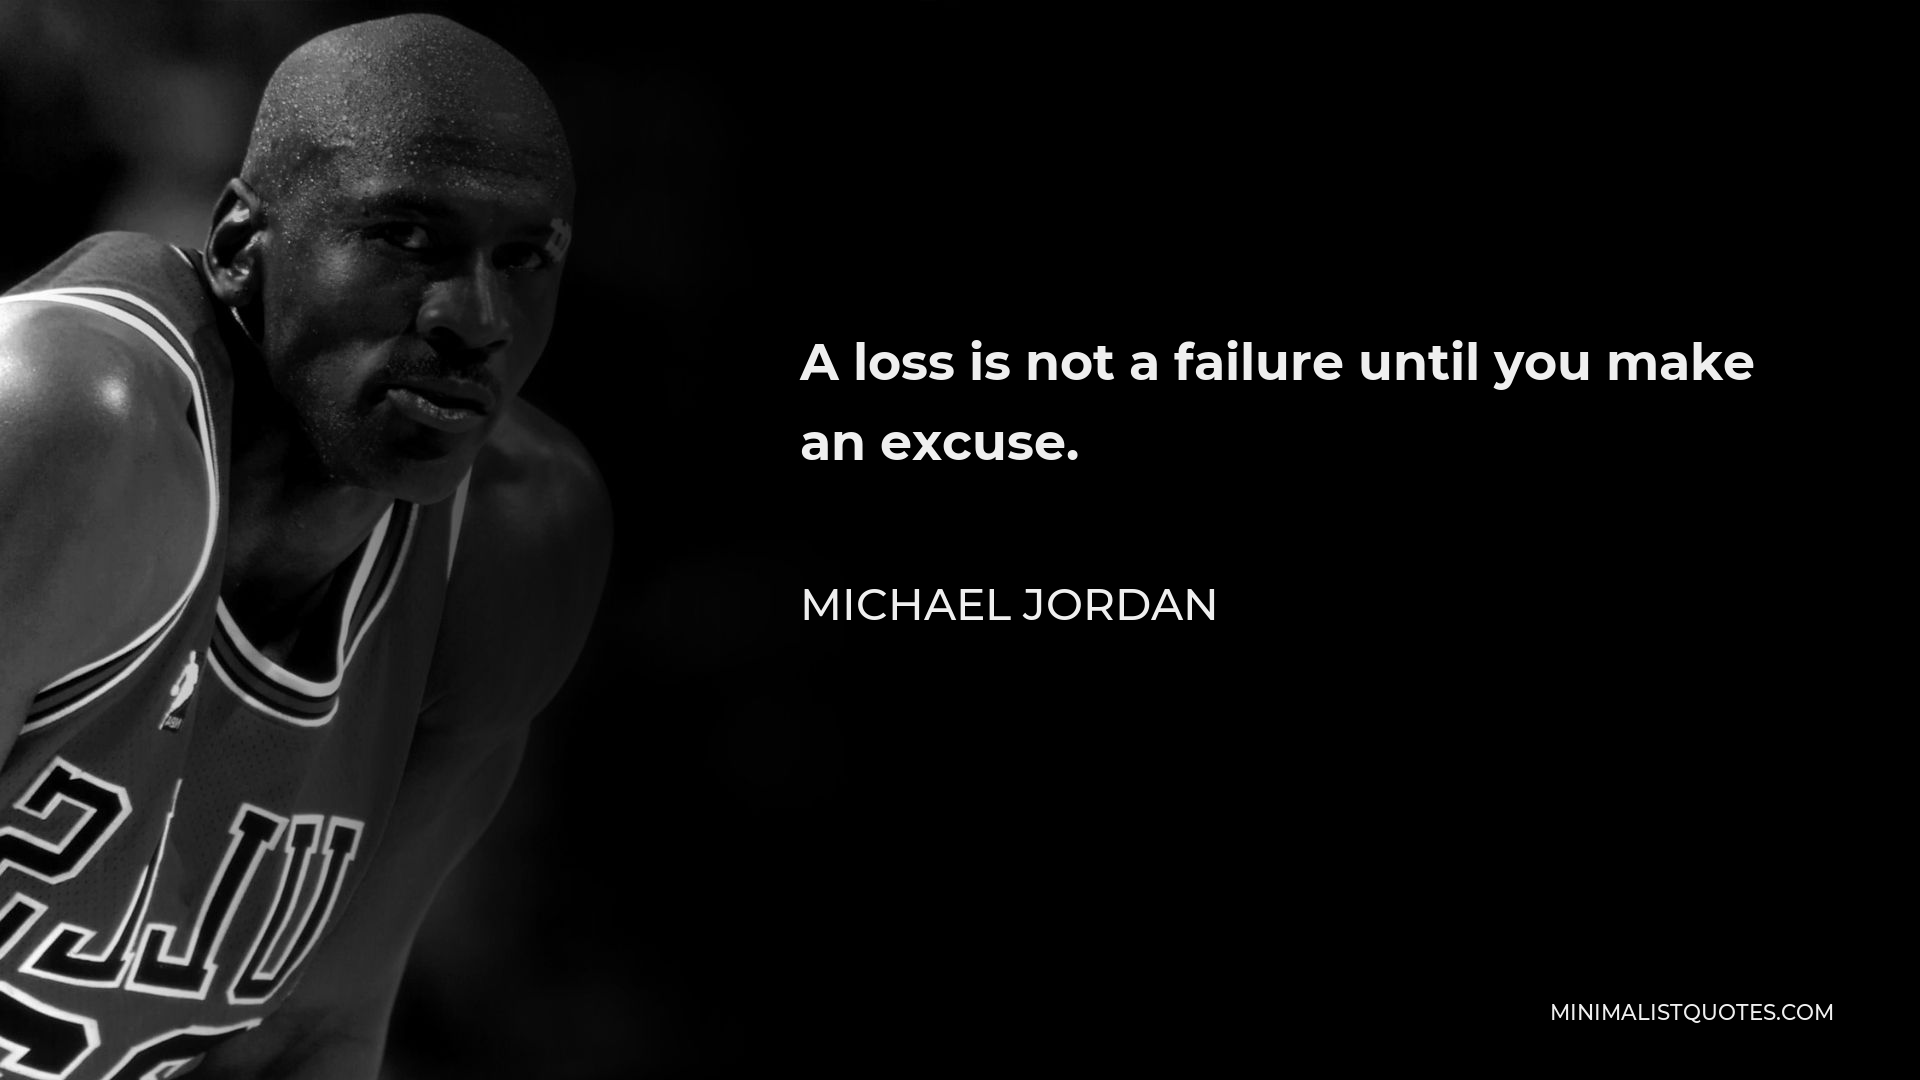 Michael Jordan Quote - A loss is not a failure until you make an excuse.